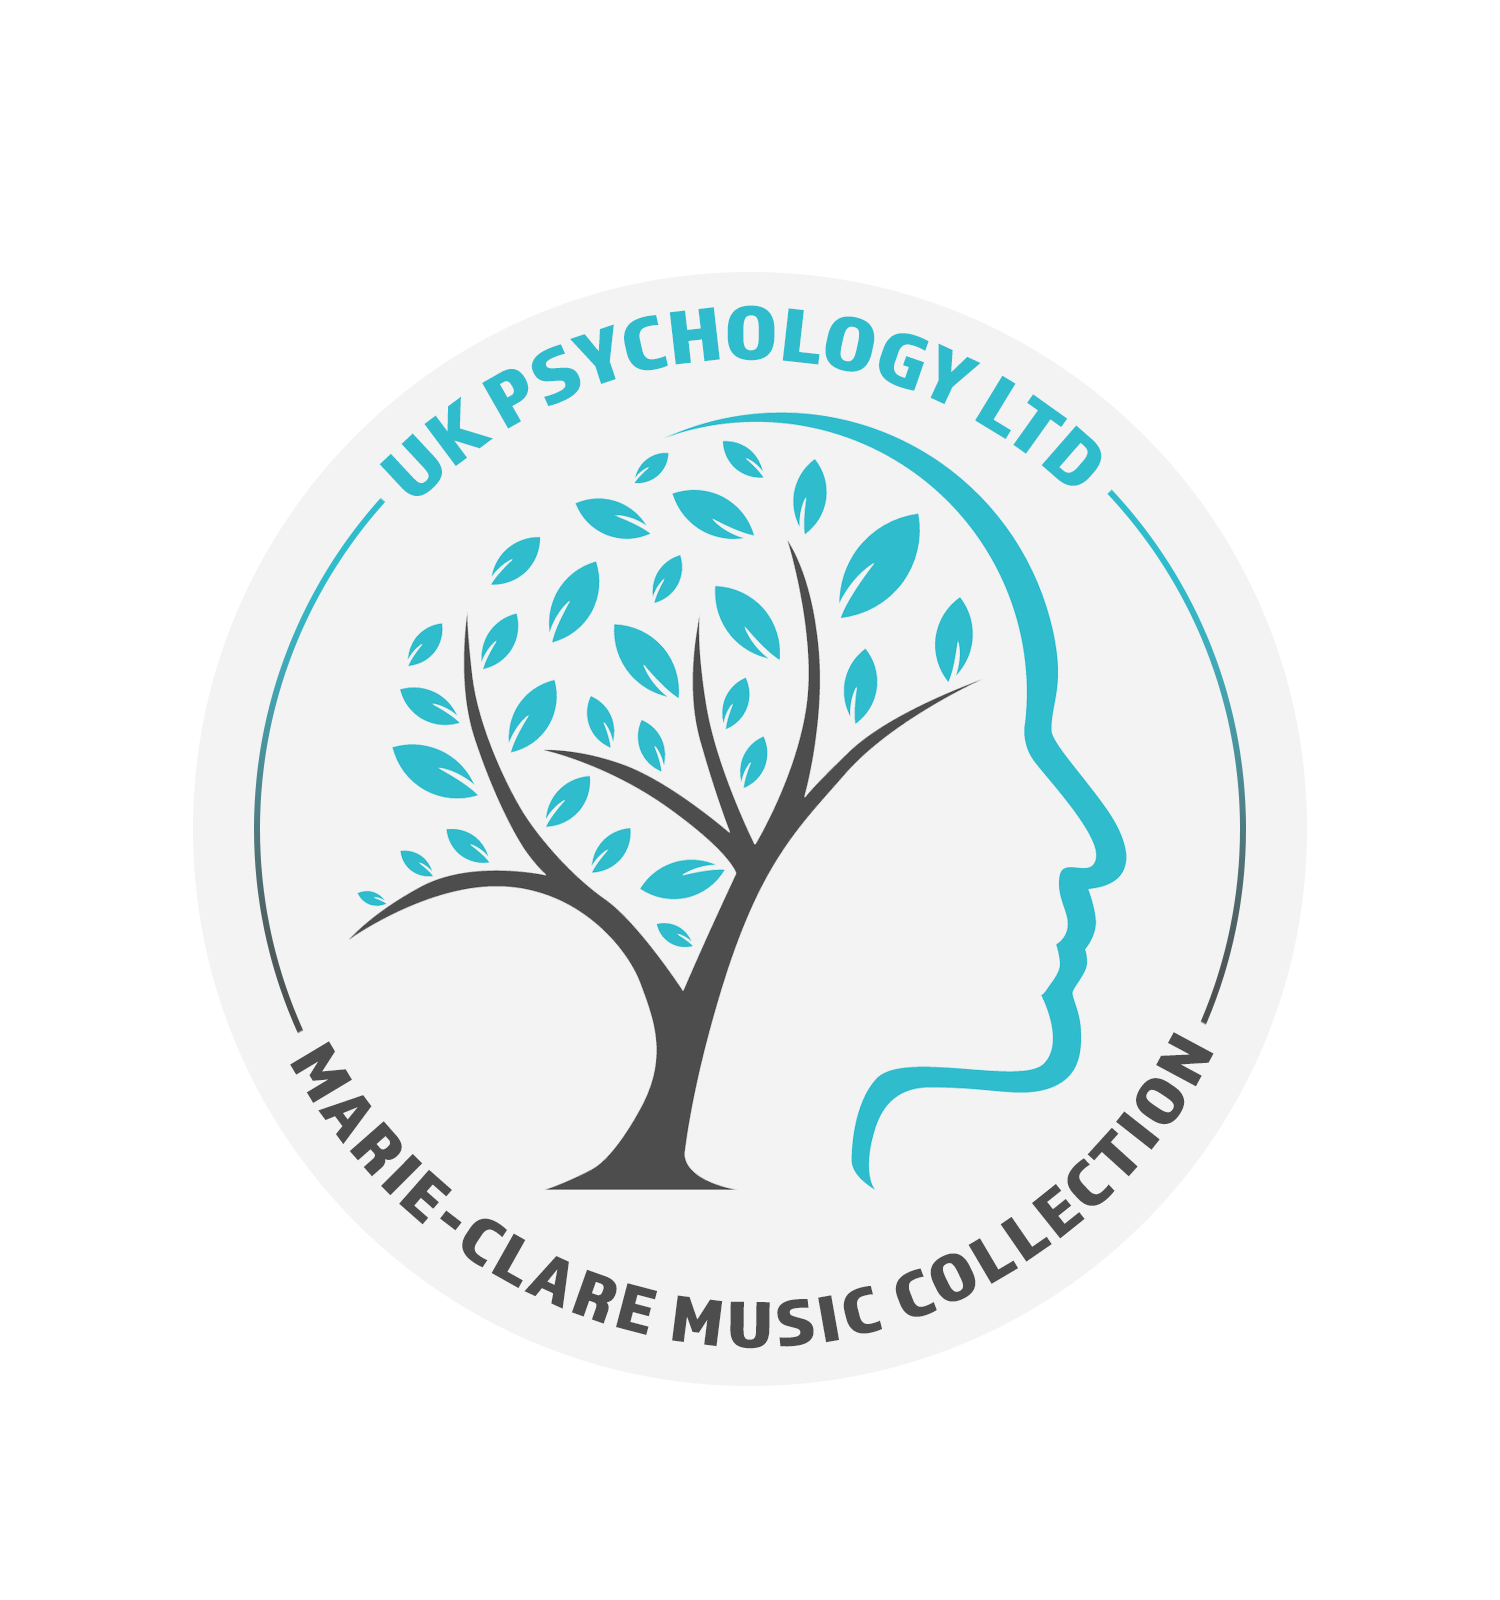 World Mental Health Month: One Media curate Mental Health Playlists in partnership with UK Psychology’s Marie-Clare Mendham